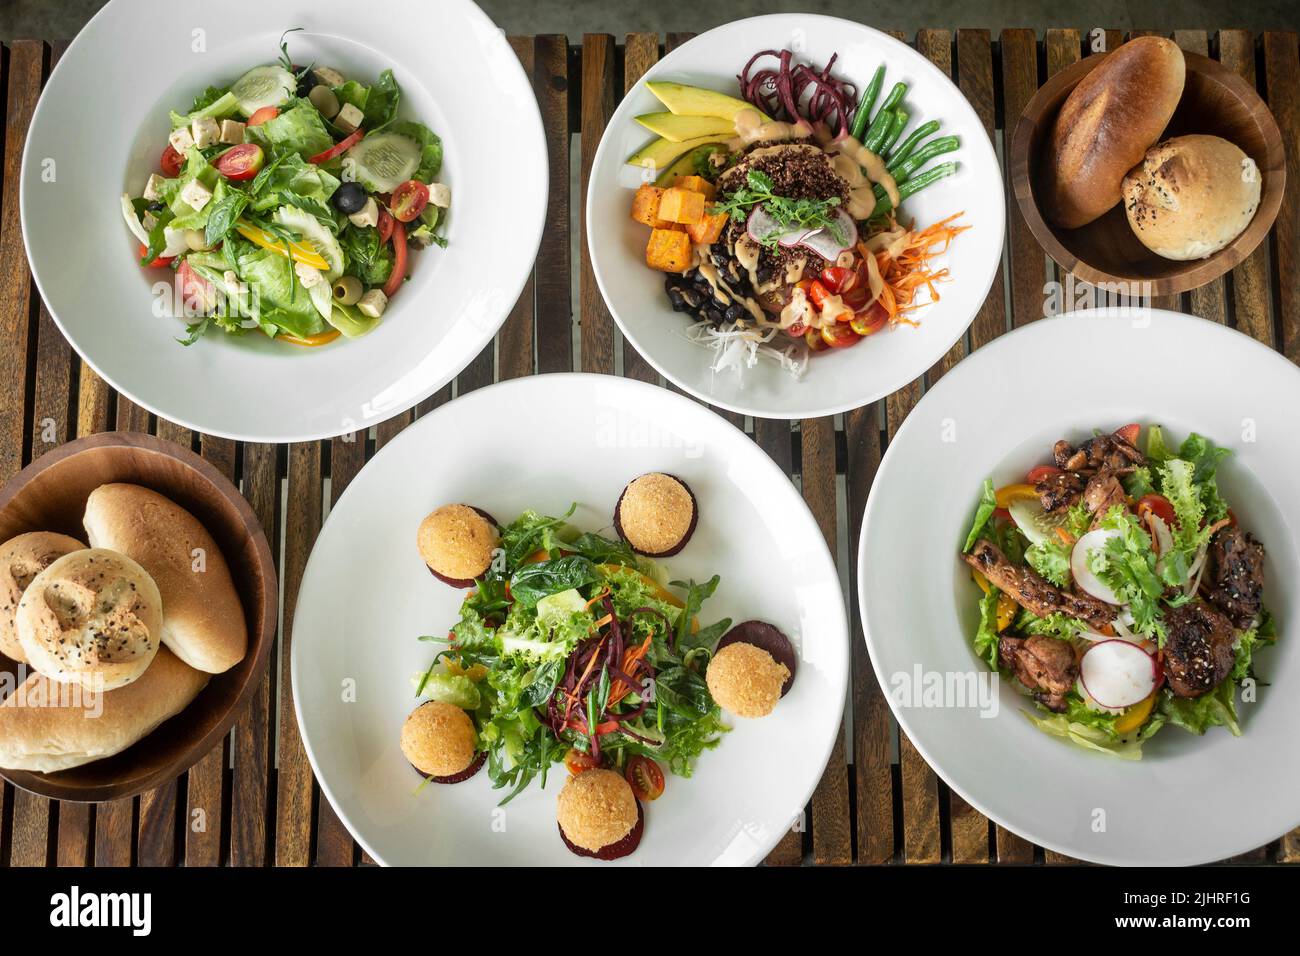 several different fresh mixed salad dishes on restaurant table Stock Photo